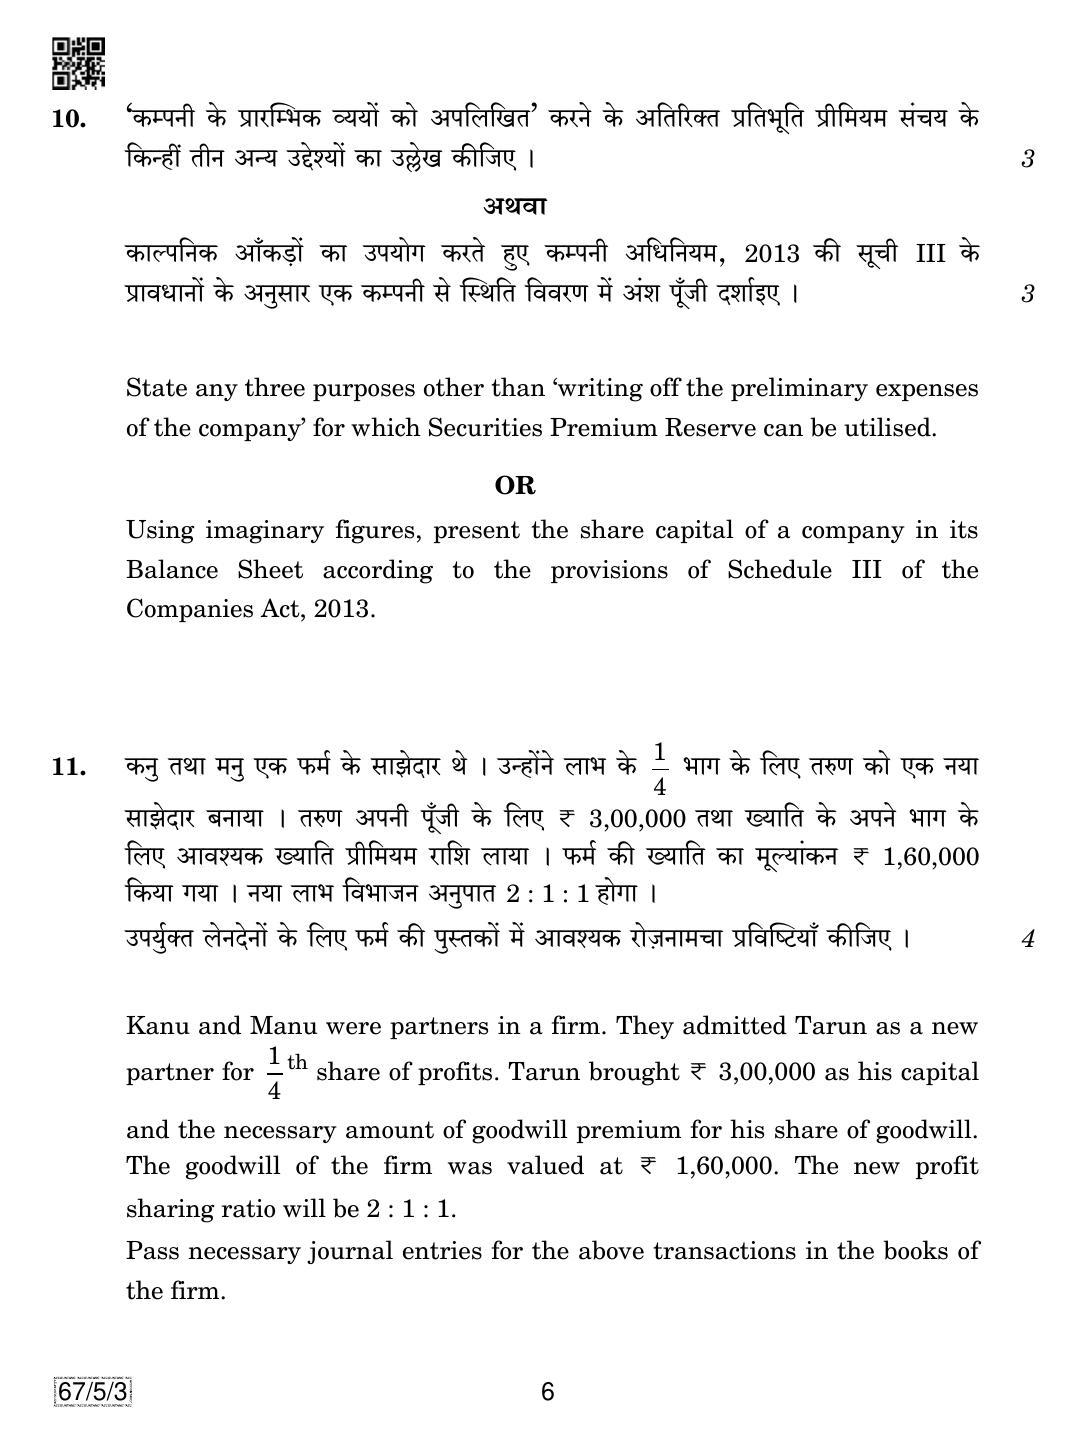 CBSE Class 12 67-5-3 Accountancy 2019 Question Paper - Page 6